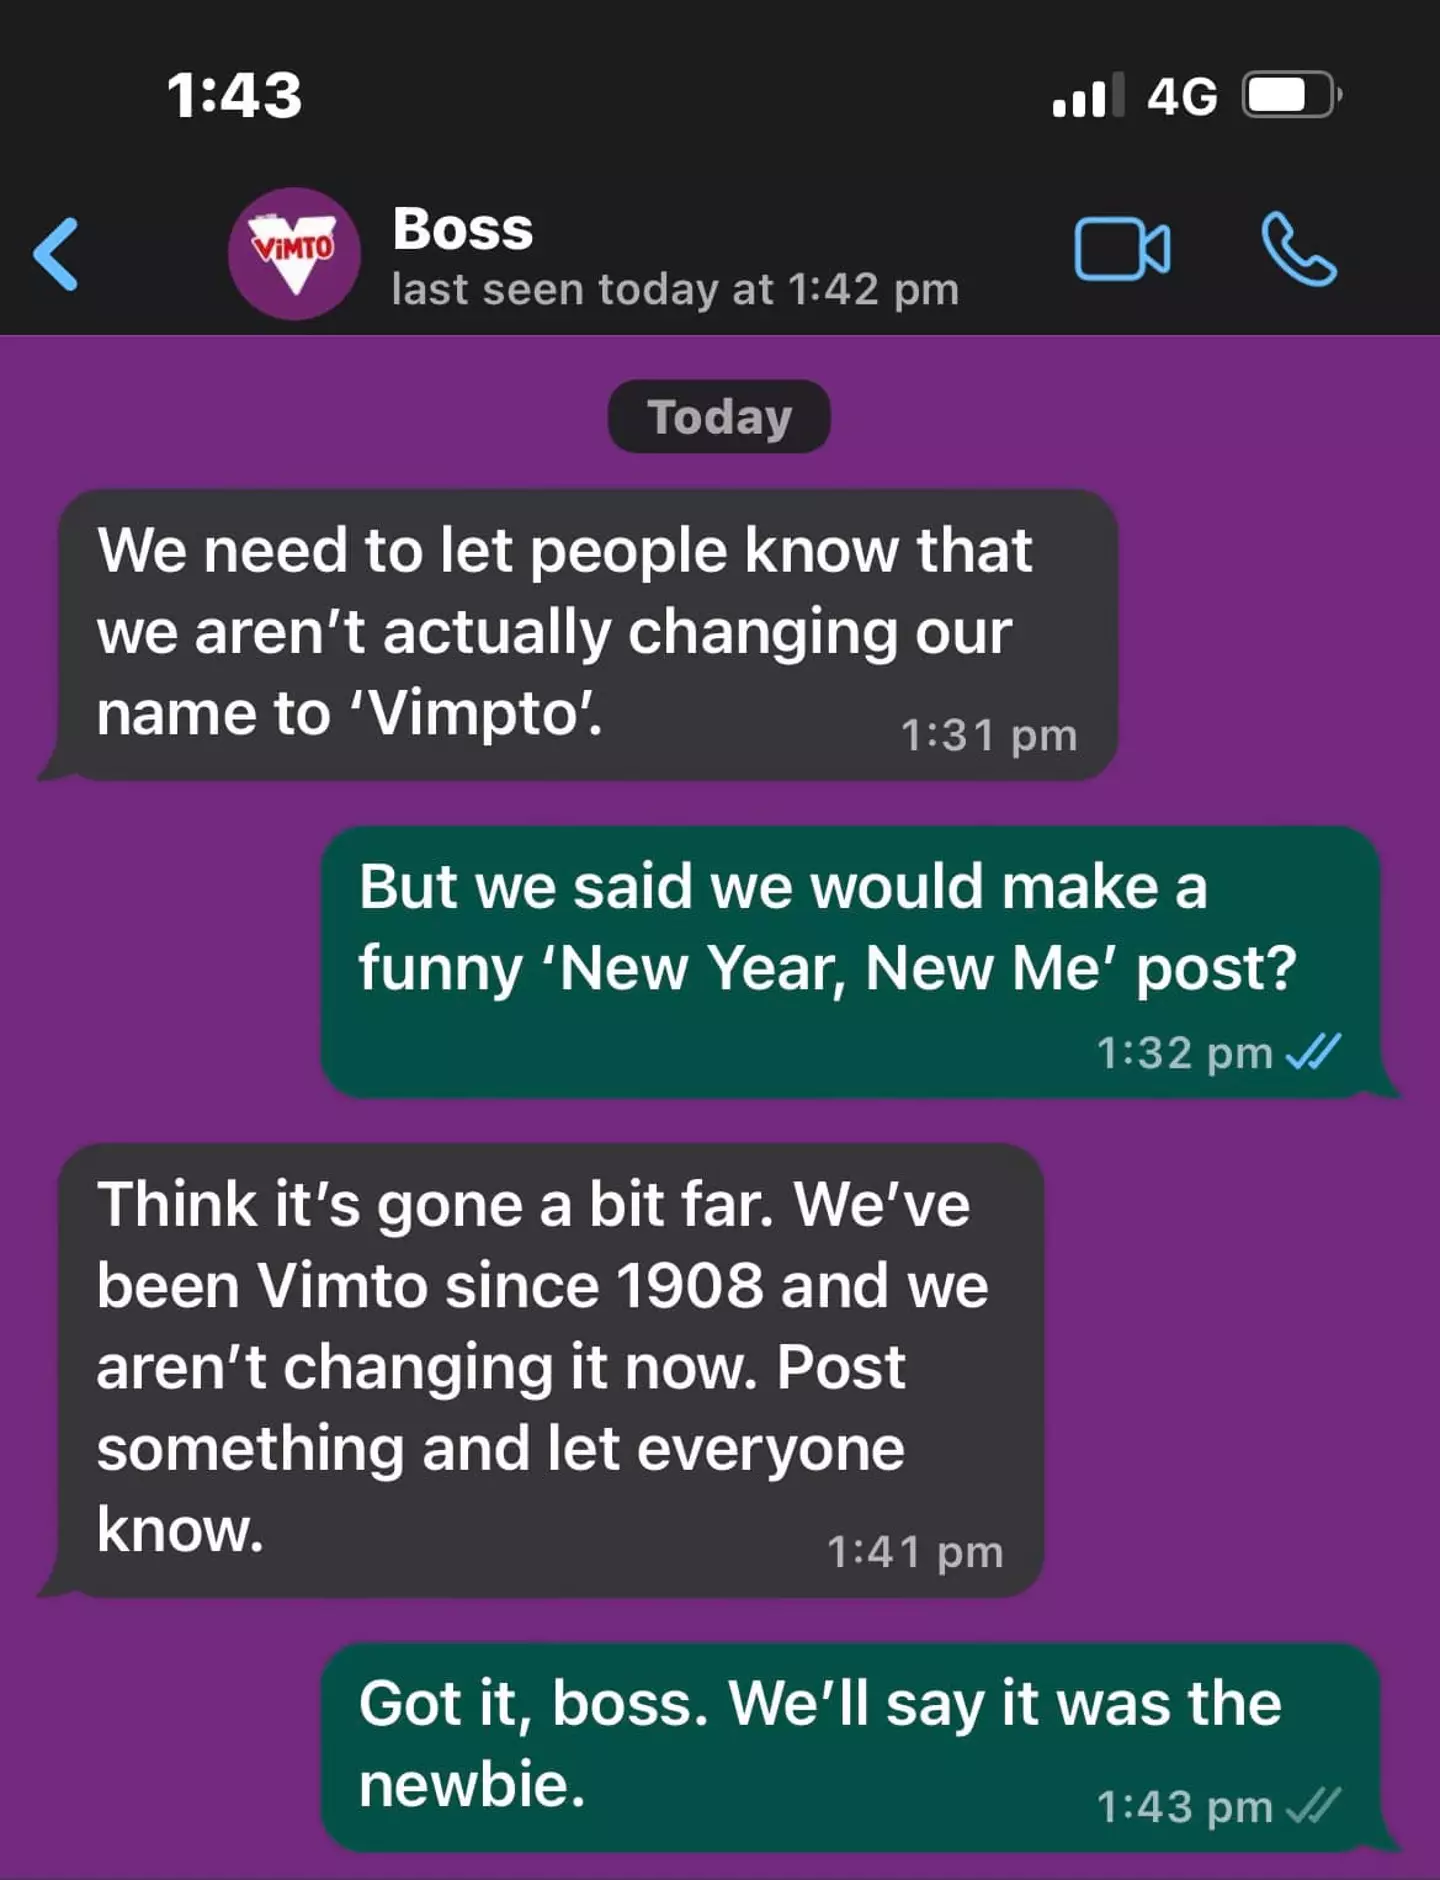 Vimto later confirmed it wasn't actually changing its name, but the debate still raged on.